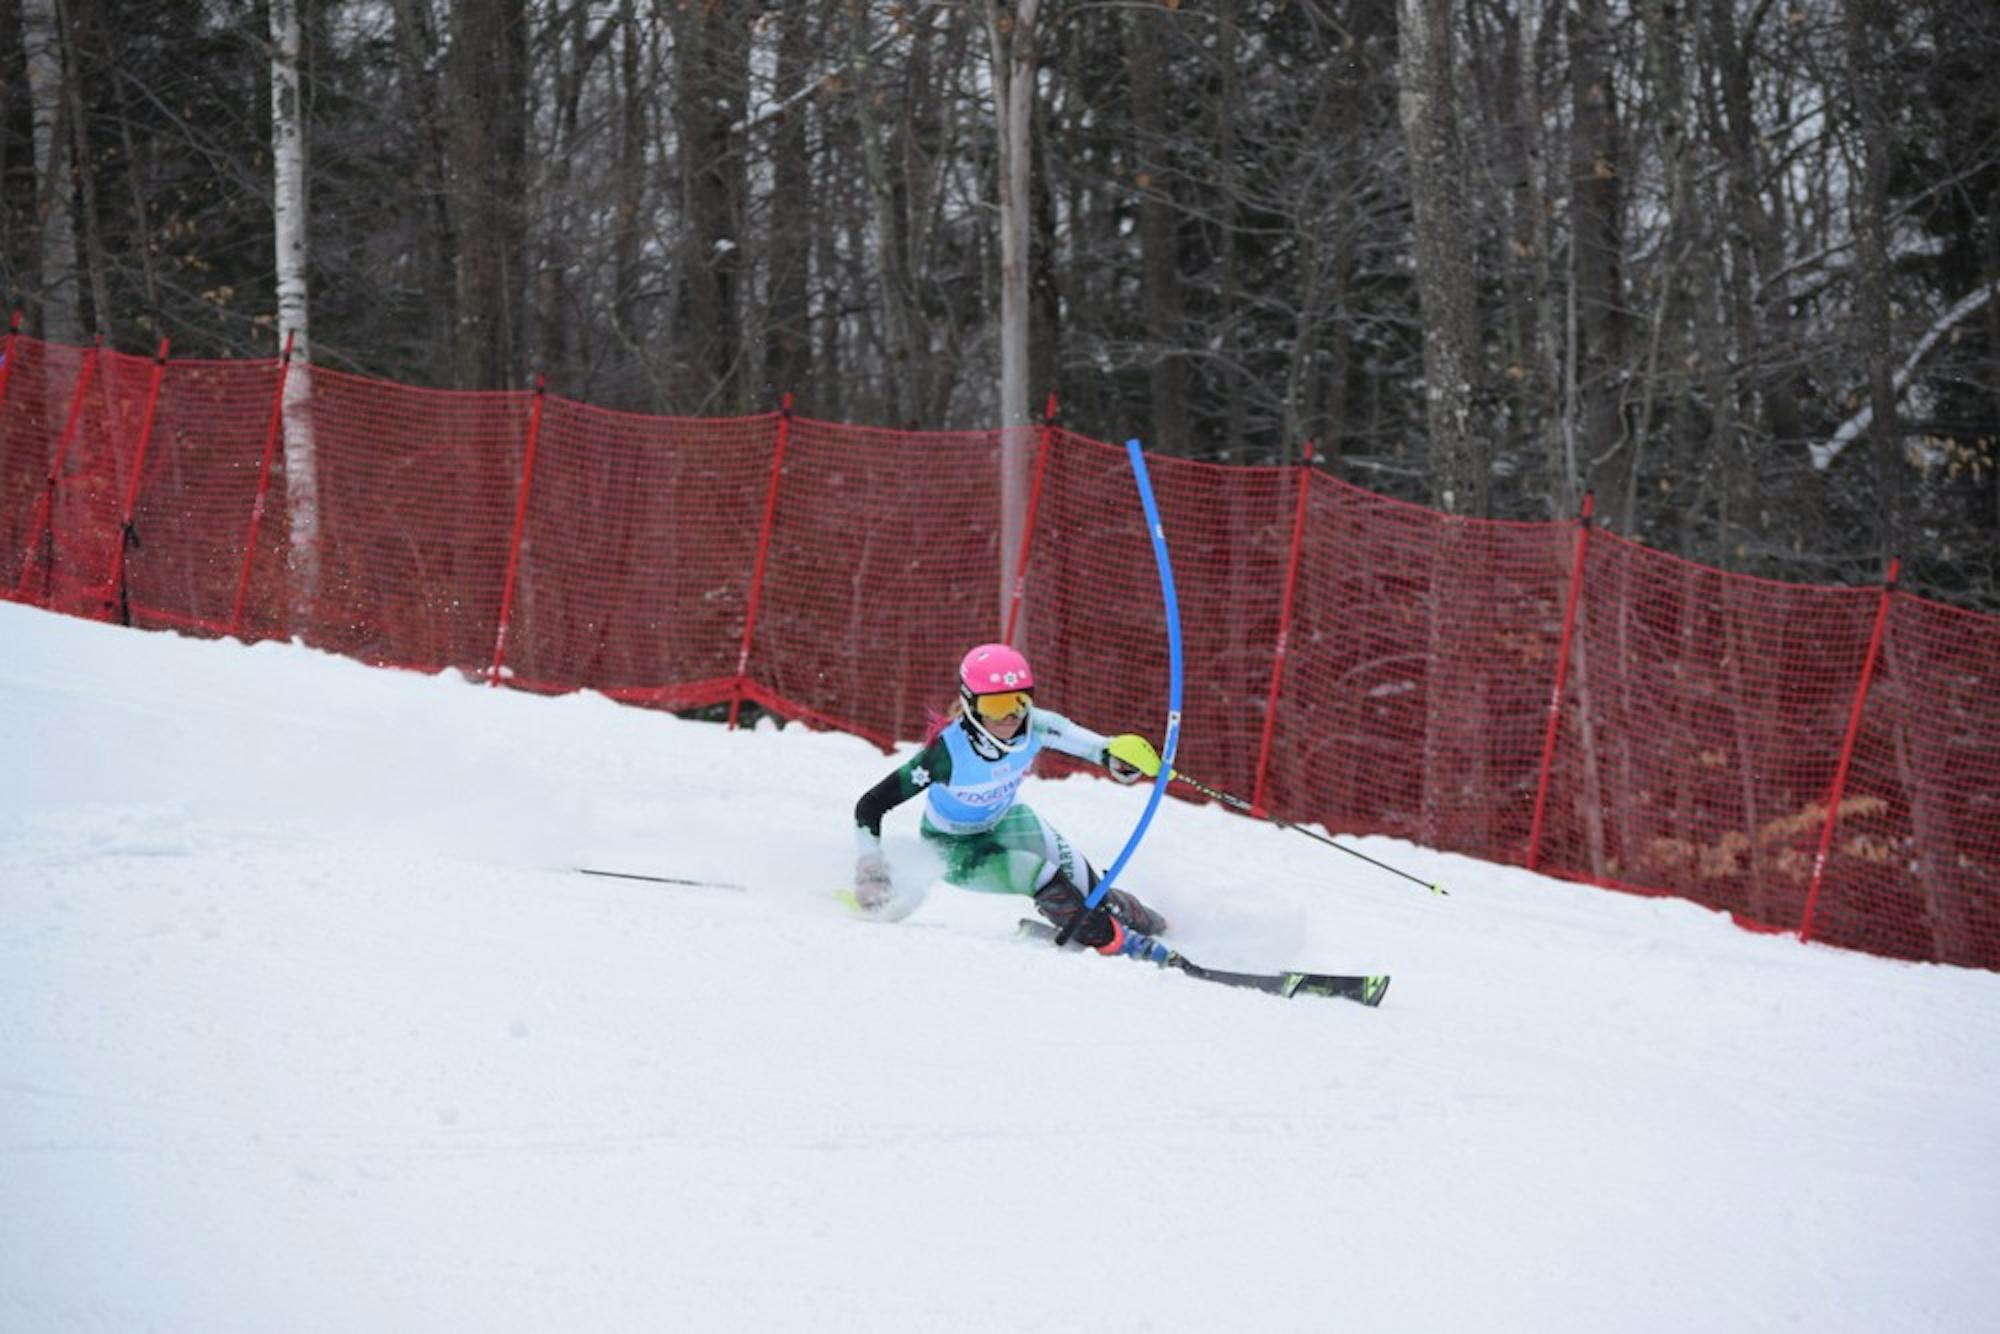 Kelly Moore '18 placed seventh in the giant slalom competition of the Dartmouth Carnival on Friday.